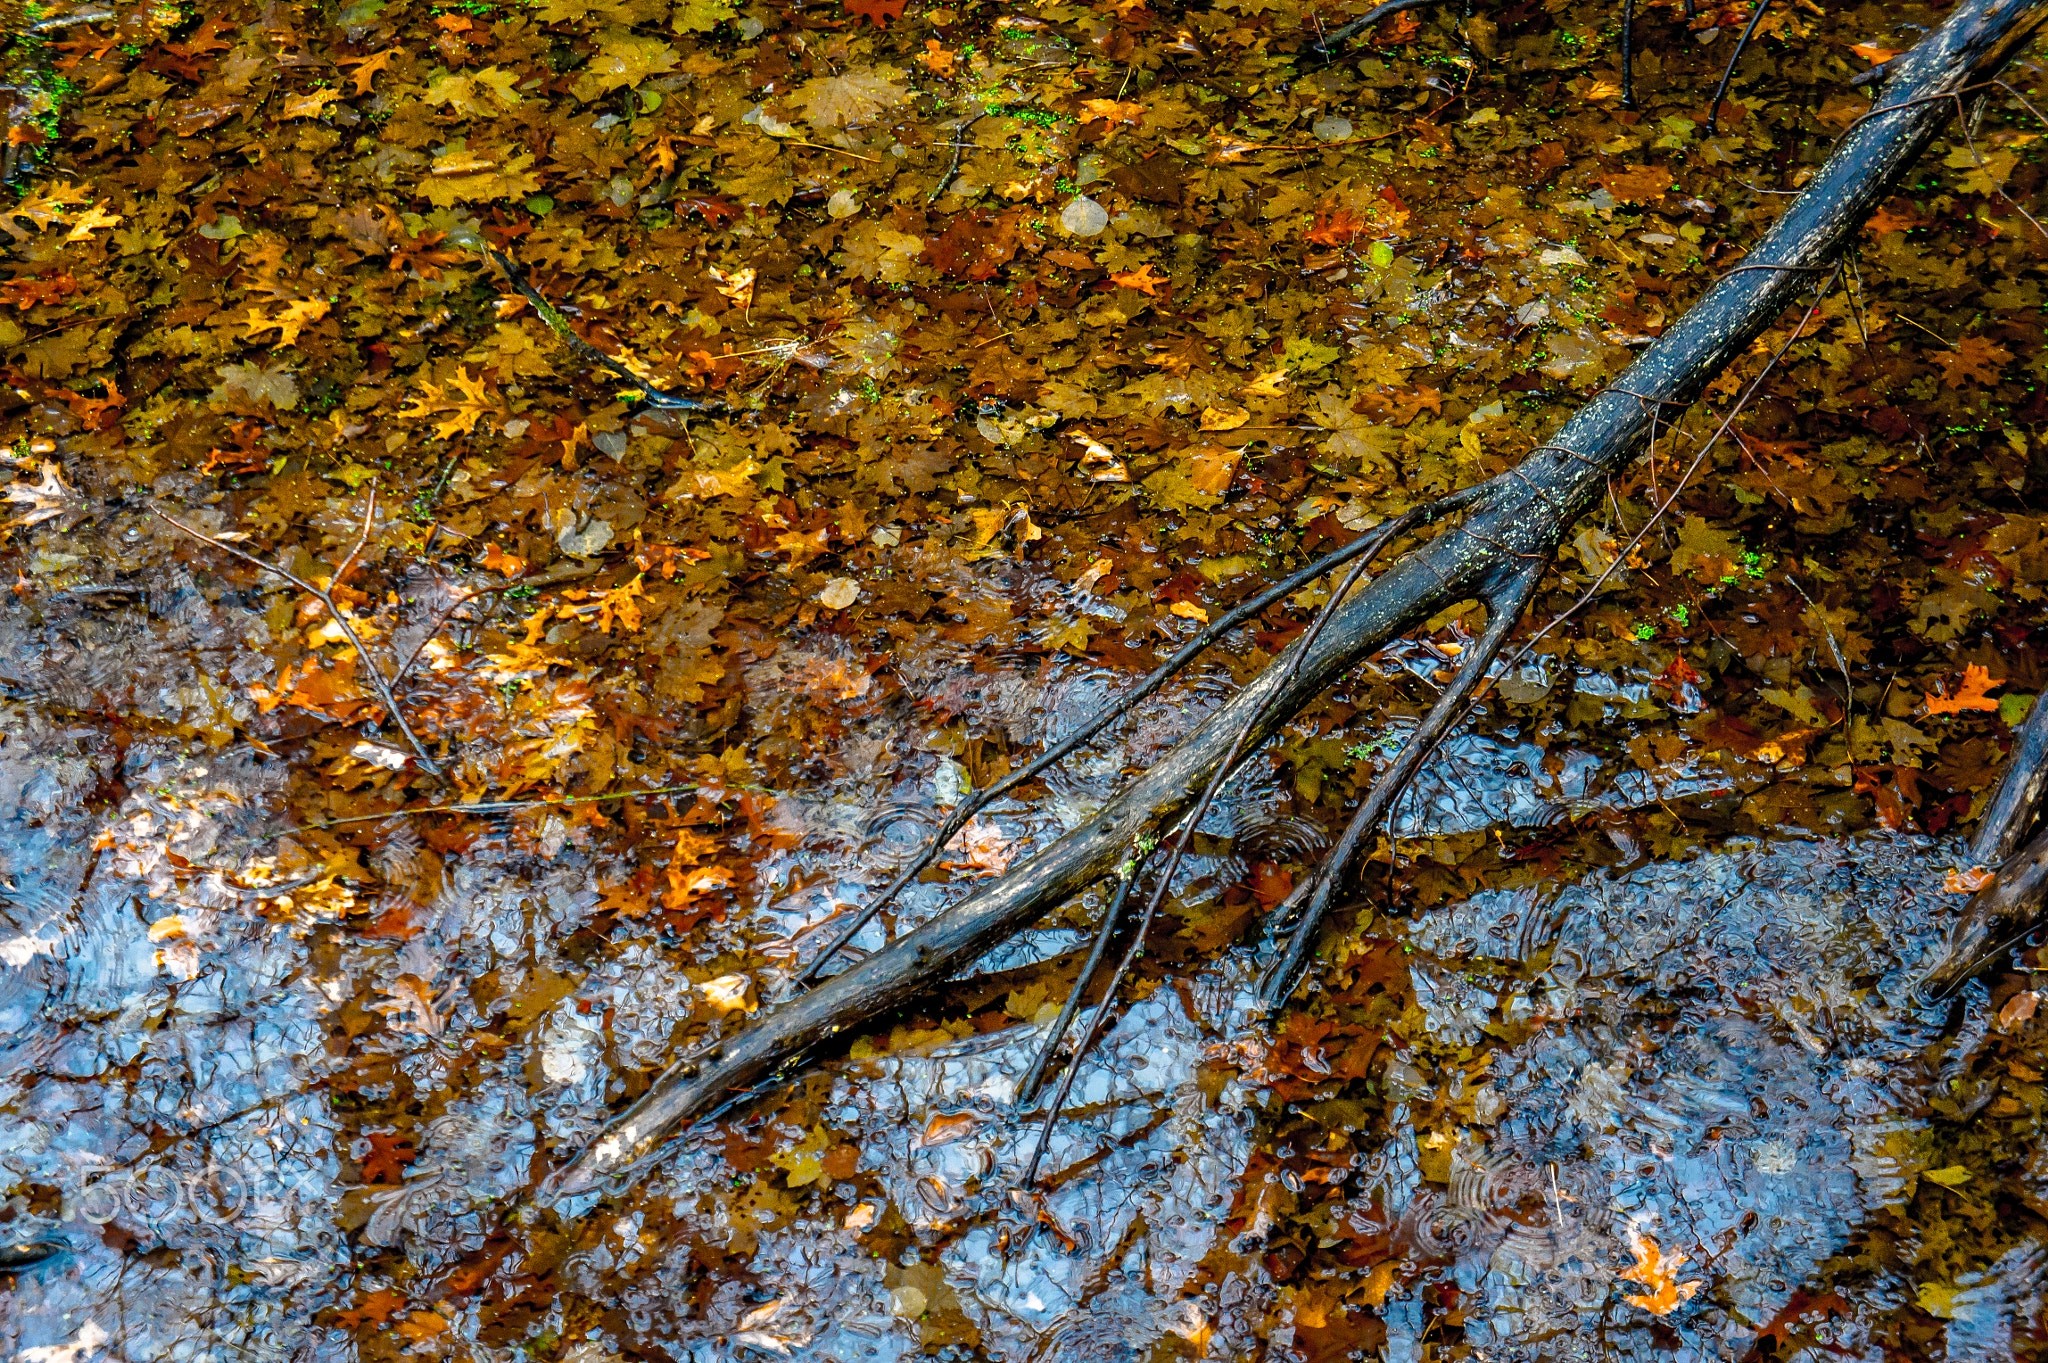 General 2048x1363 500px water branch nature fall leaves